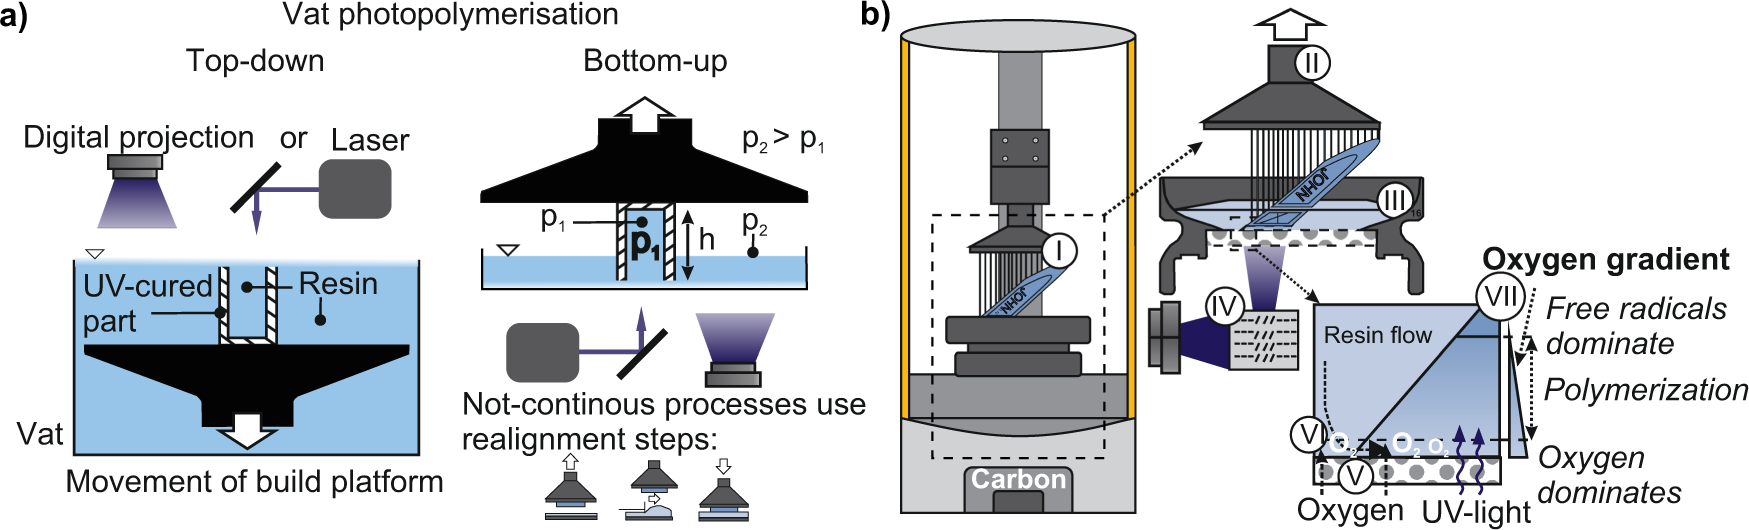 entusiasme Menneskelige race Ruddy Cavity vat photopolymerisation for additive manufacturing of  polymer-composite 3D objects | Communications Materials